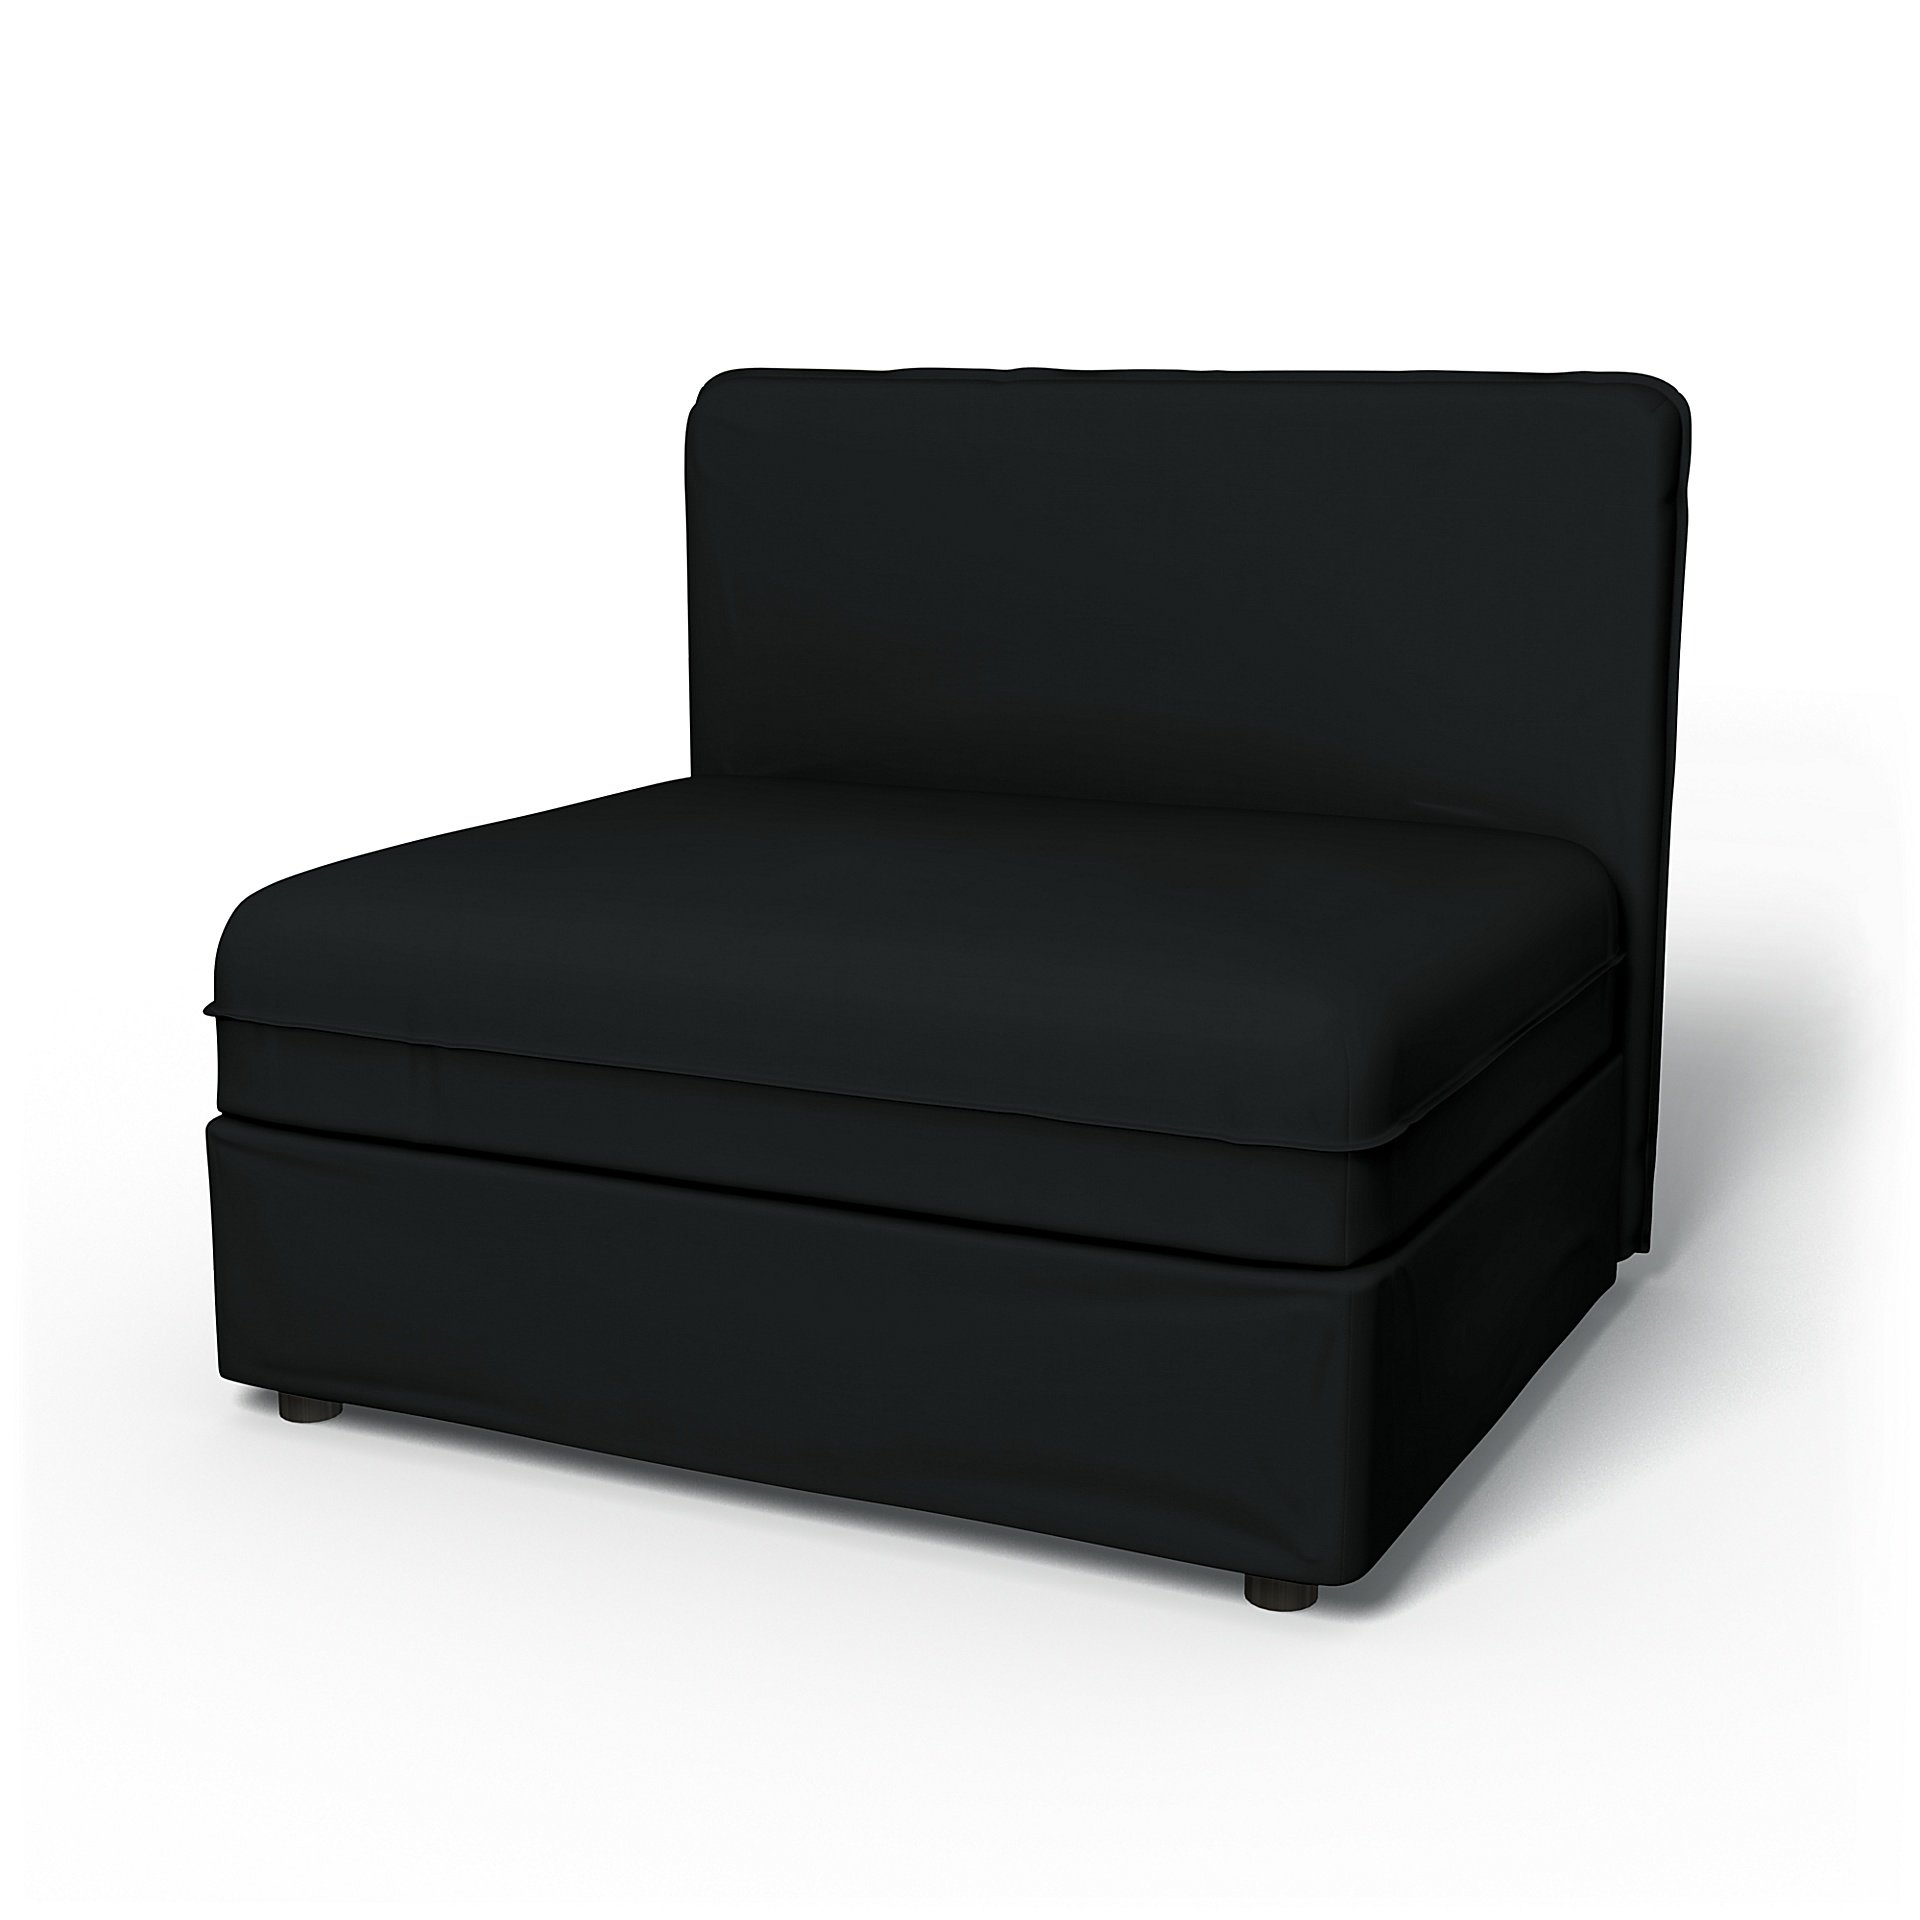 IKEA - Vallentuna Seat Module with Low Back Cover 100x80cm 39x32in, Jet Black, Cotton - Bemz